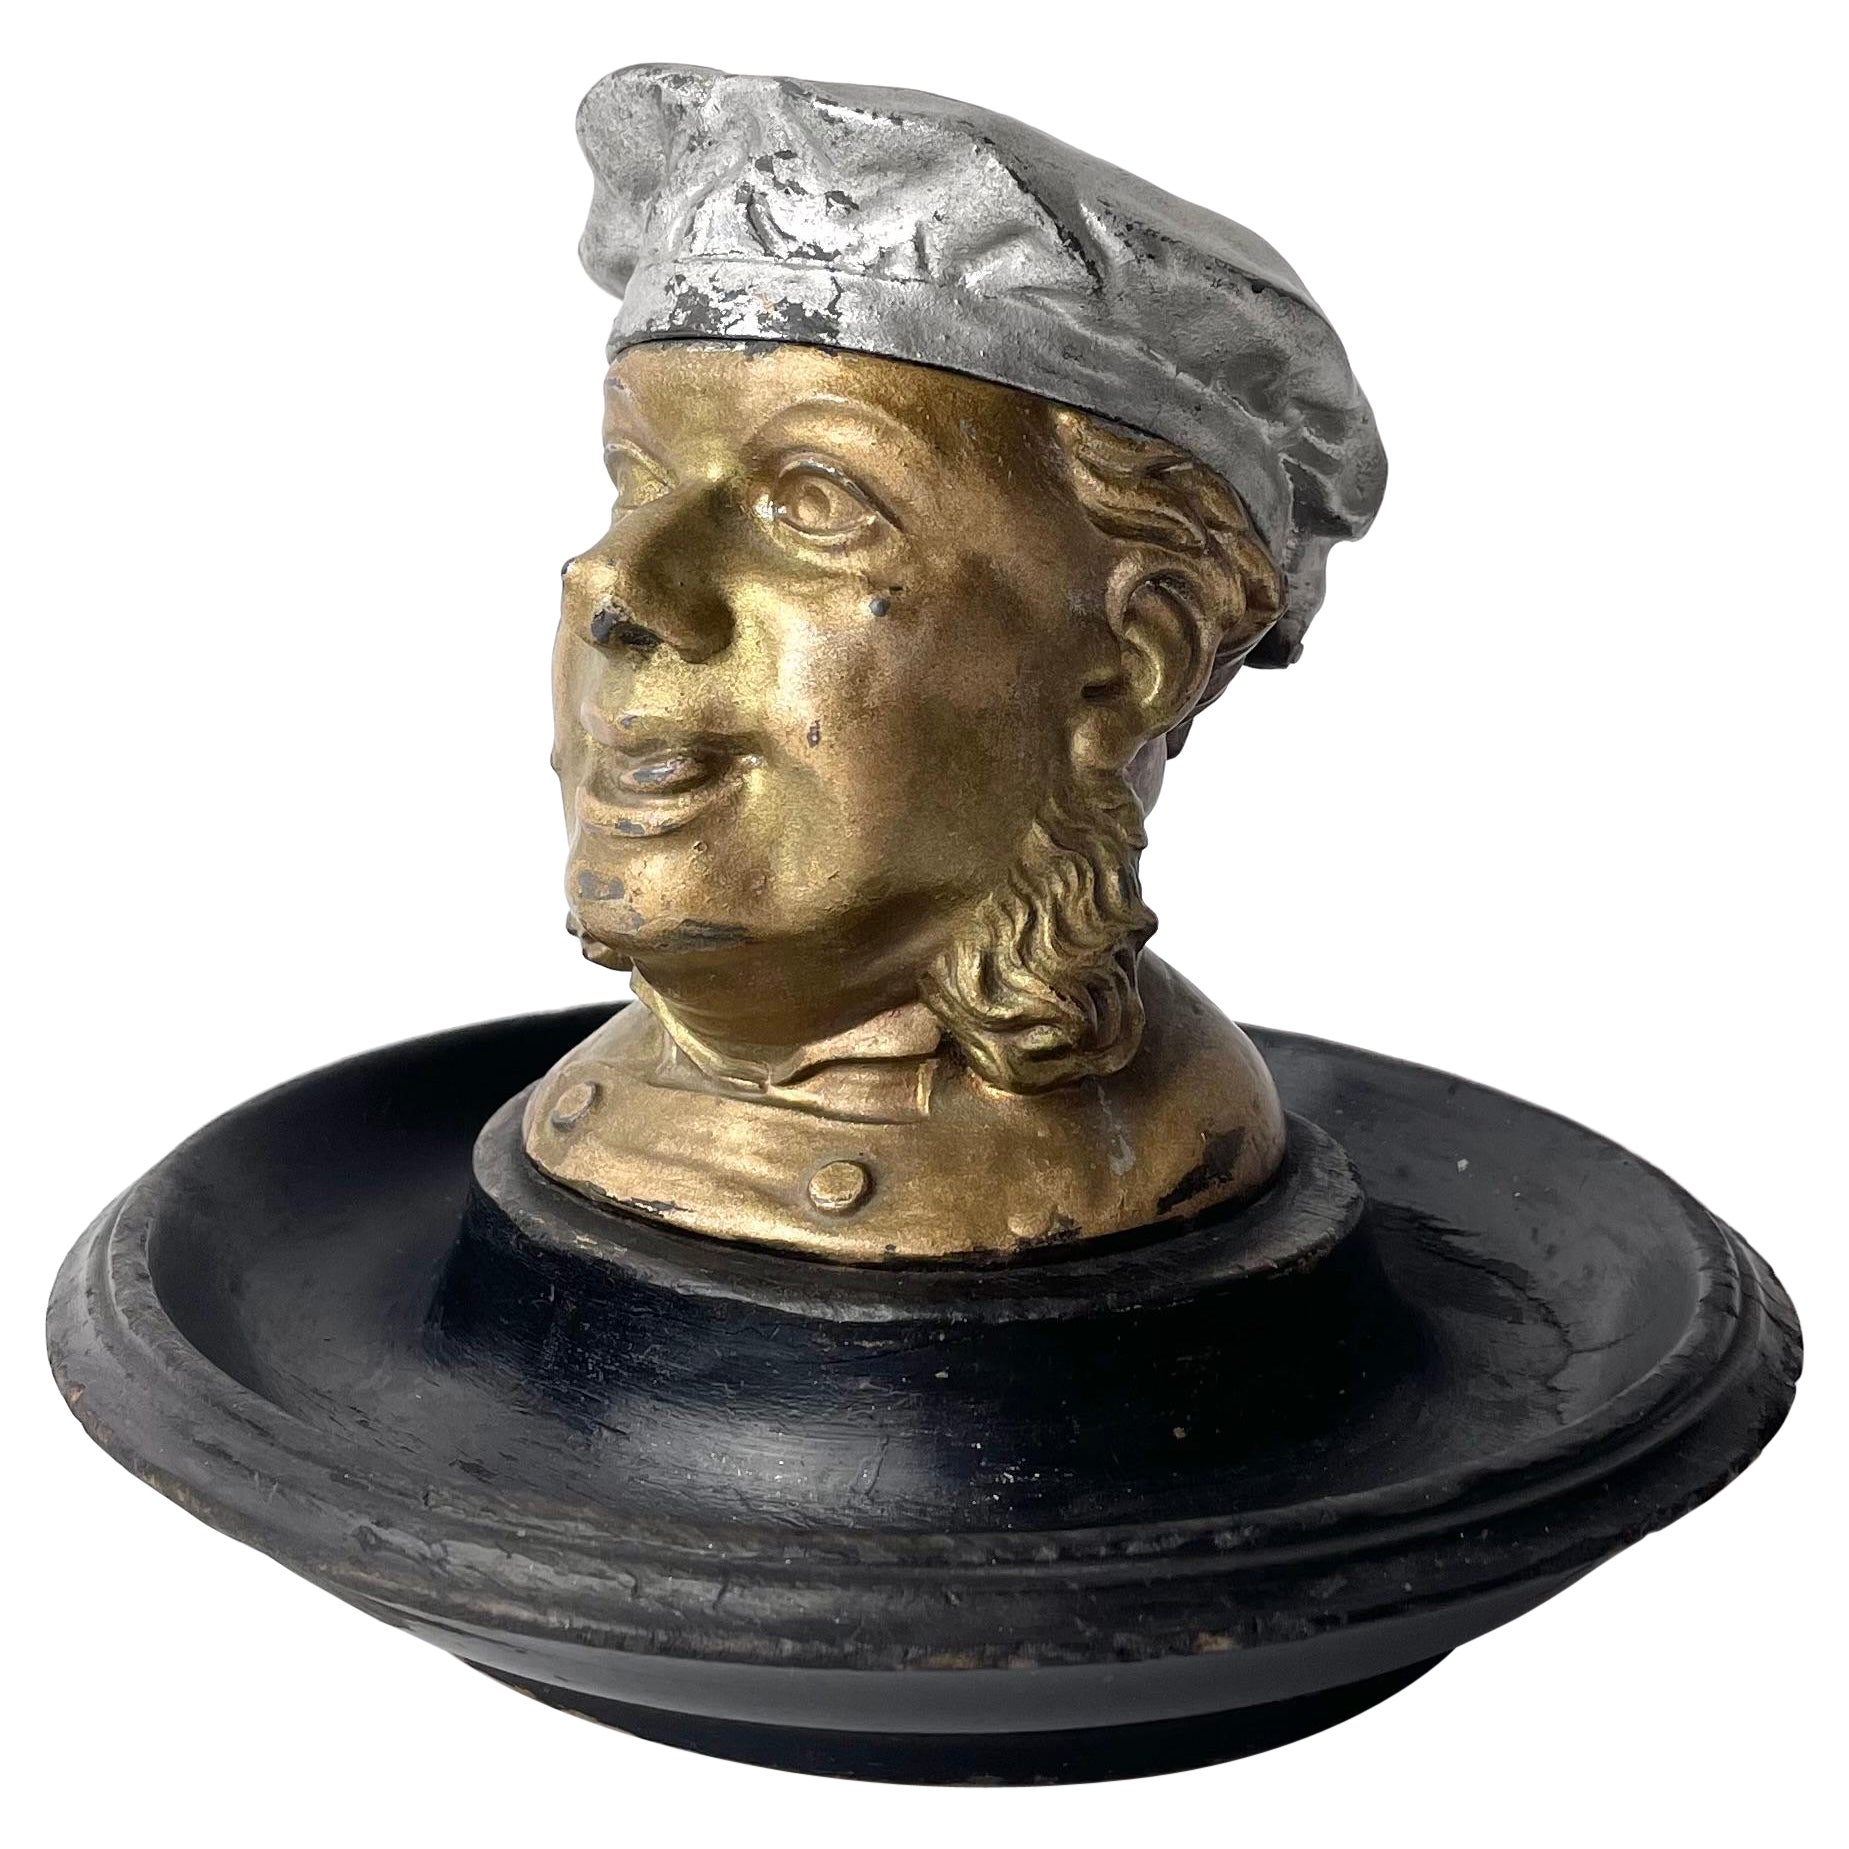 Charming Headshaped Ink Stand, Gilt White Metal Patinated Wood 19th C. England For Sale